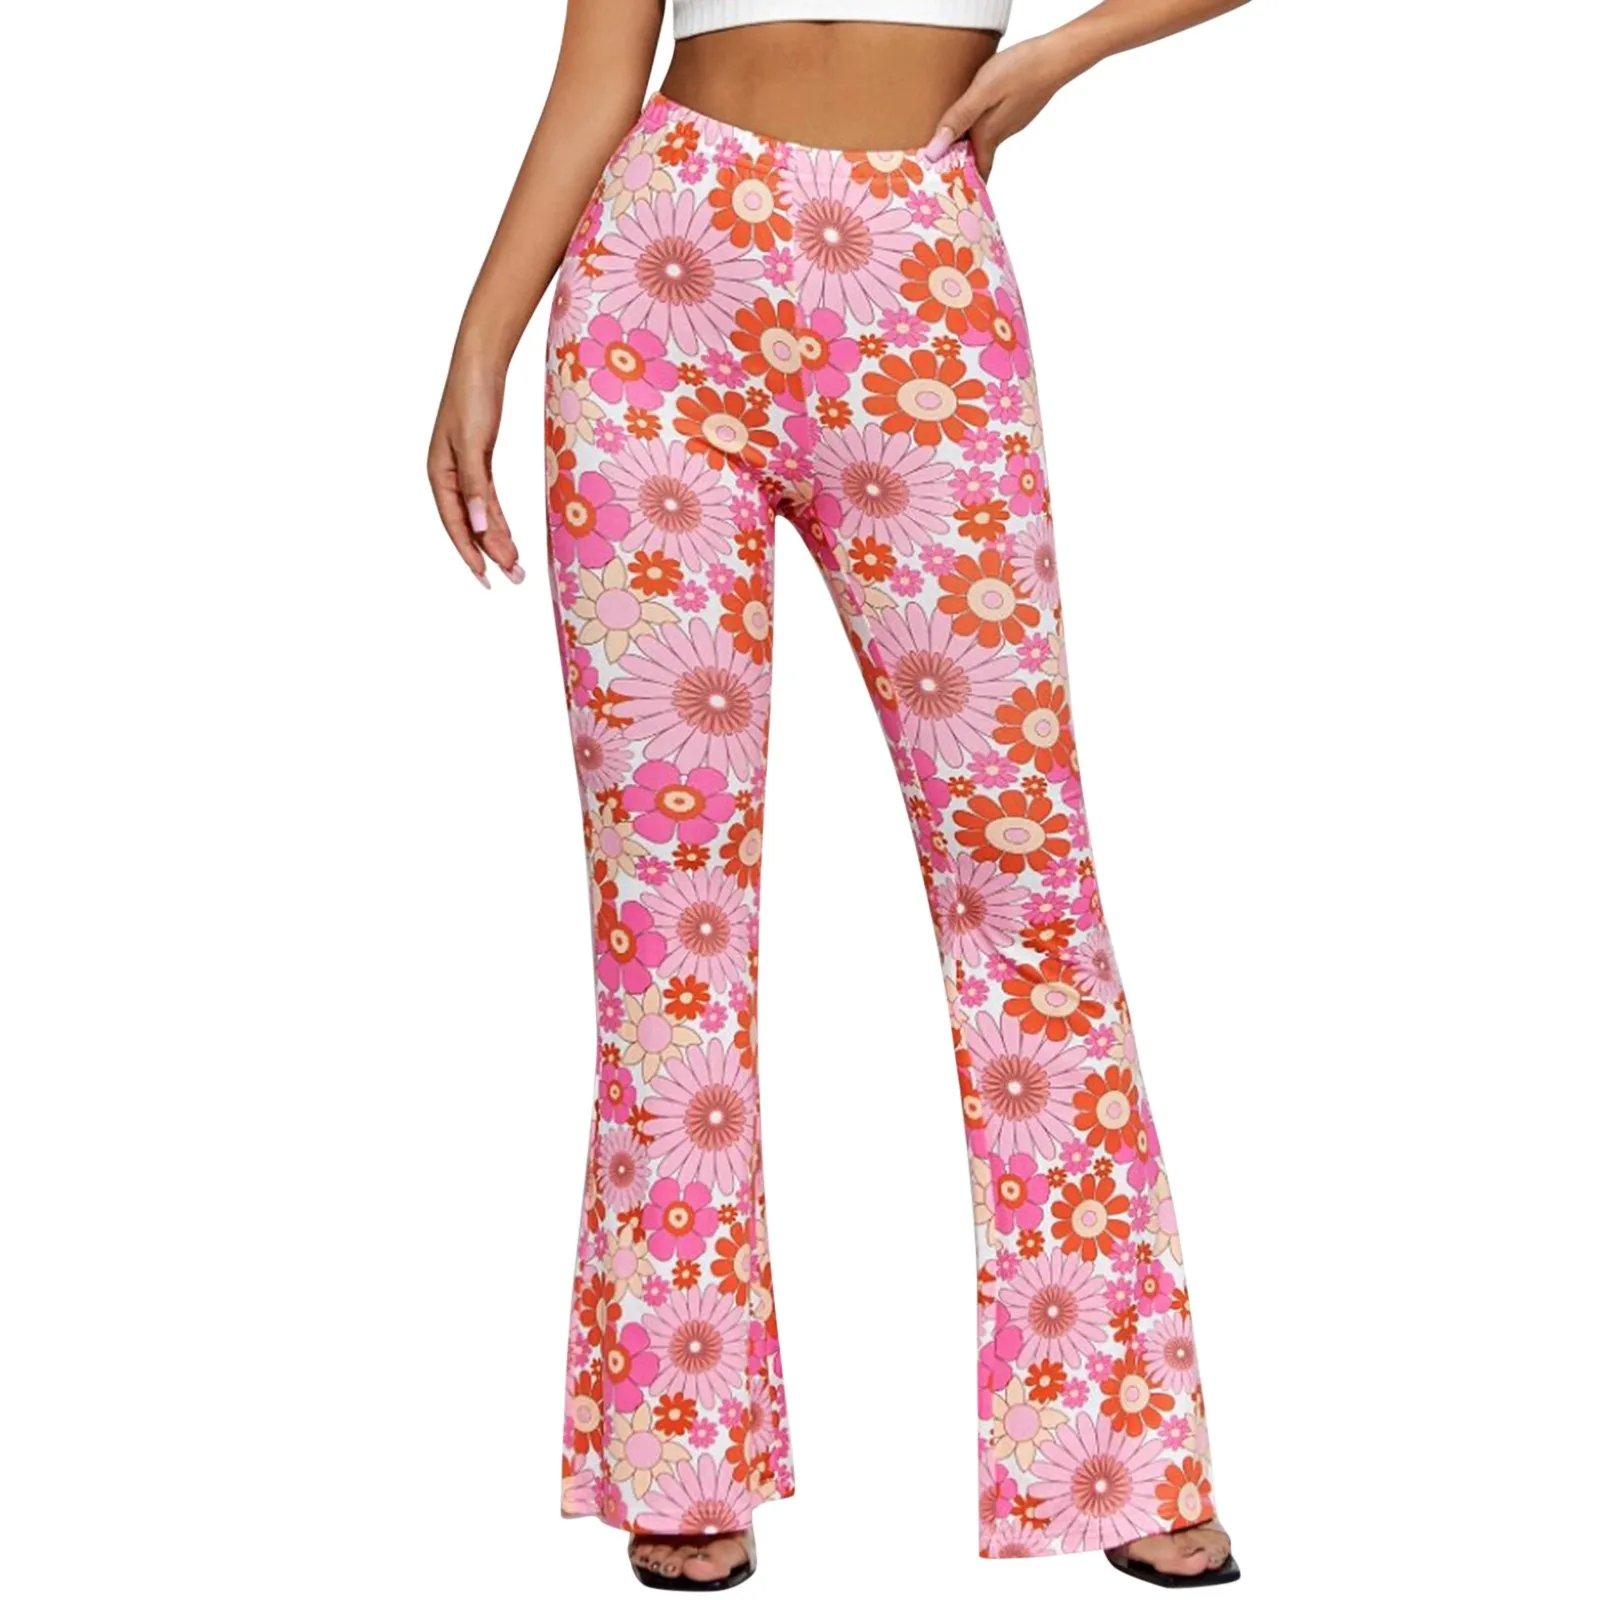 Women's Plus Size Floral Print Flared Sweatpants - Casual Sports Trousers